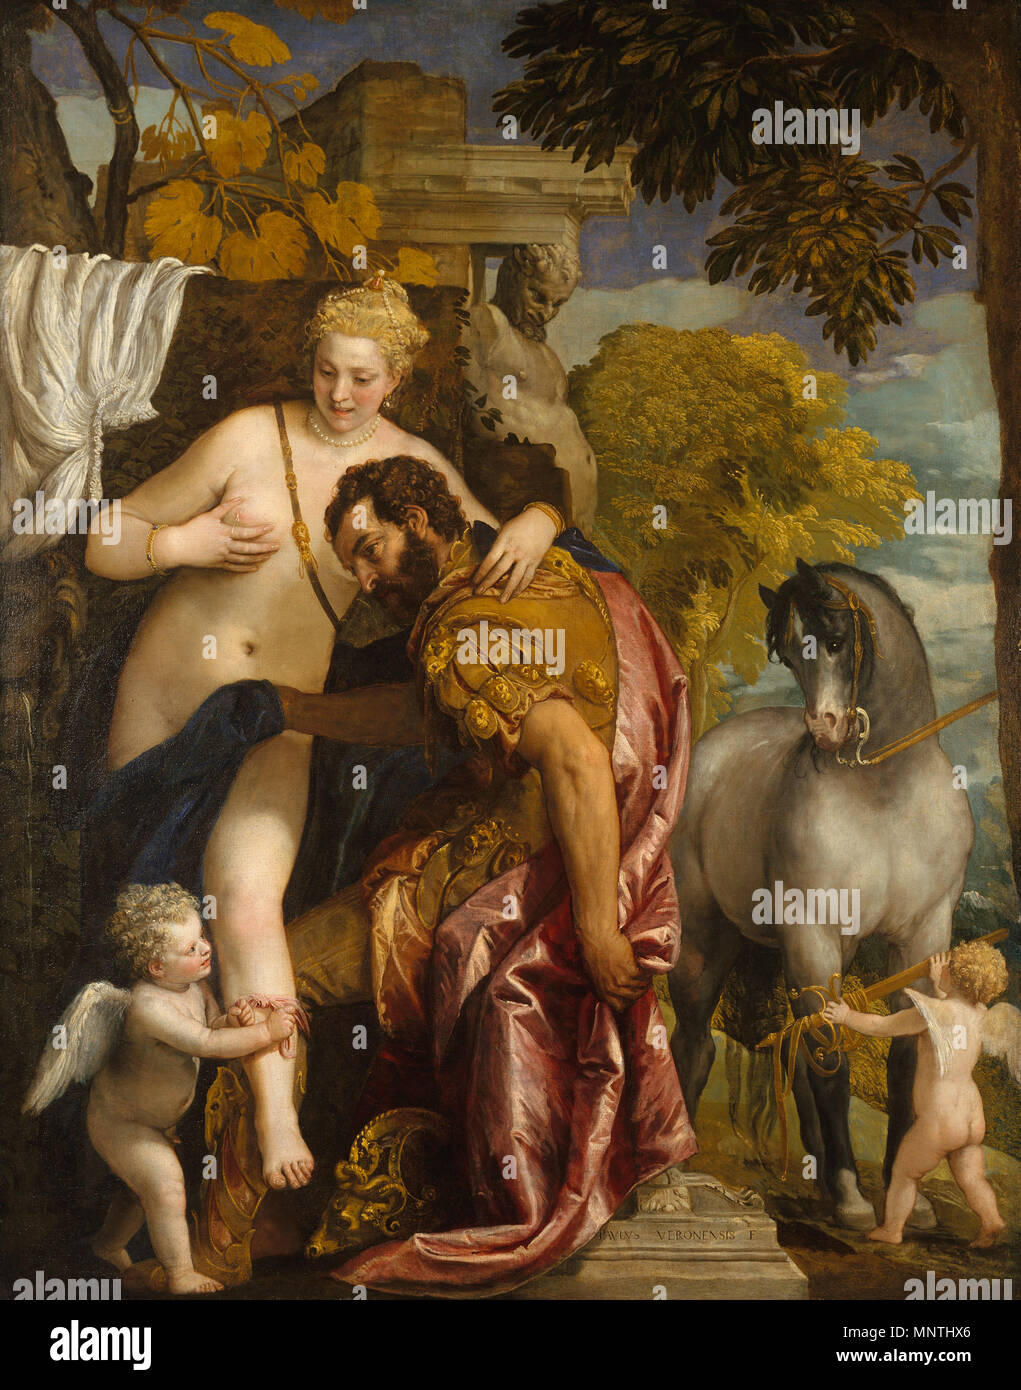 4.Mars and Venus United by Love, mid 1570s Paolo Veronese  Oil on canvas *Lent by The Metropolitan Museum of Art, John Stewart Kennedy Fund, 1910 *Courtesy, Museum of Fine Arts, Boston   Italian: Marte e Venere uniti dall'amore Mars and Venus United by Love   mid 1570s.   1230 Veronese, Paolo - Mars and Venus United by Love - mid-1570s Stock Photo